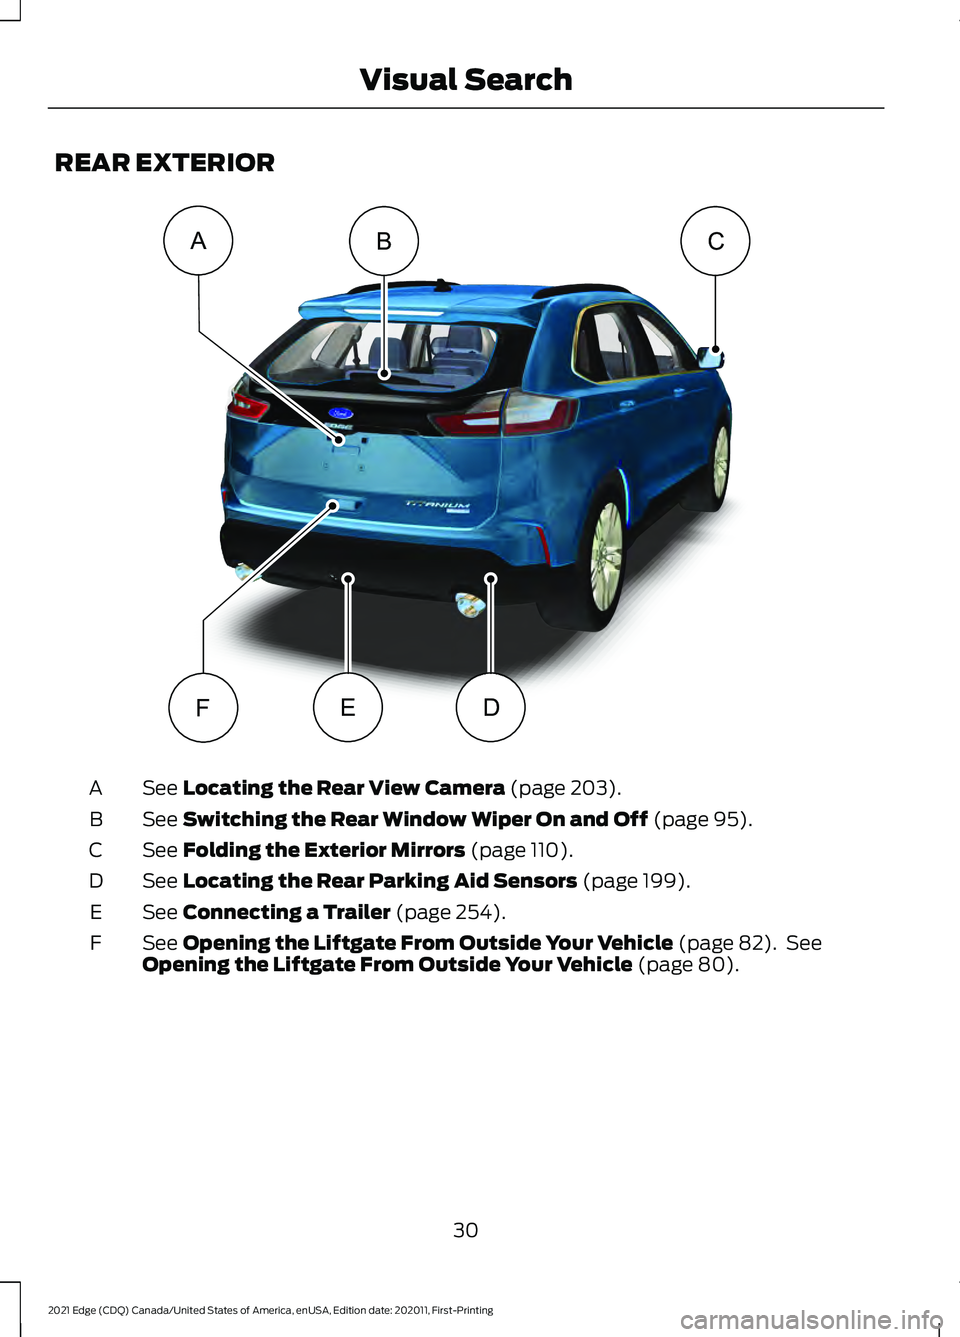 FORD EDGE 2021  Owners Manual REAR EXTERIOR
See Locating the Rear View Camera (page 203).
A
See 
Switching the Rear Window Wiper On and Off (page 95).
B
See 
Folding the Exterior Mirrors (page 110).
C
See 
Locating the Rear Parkin